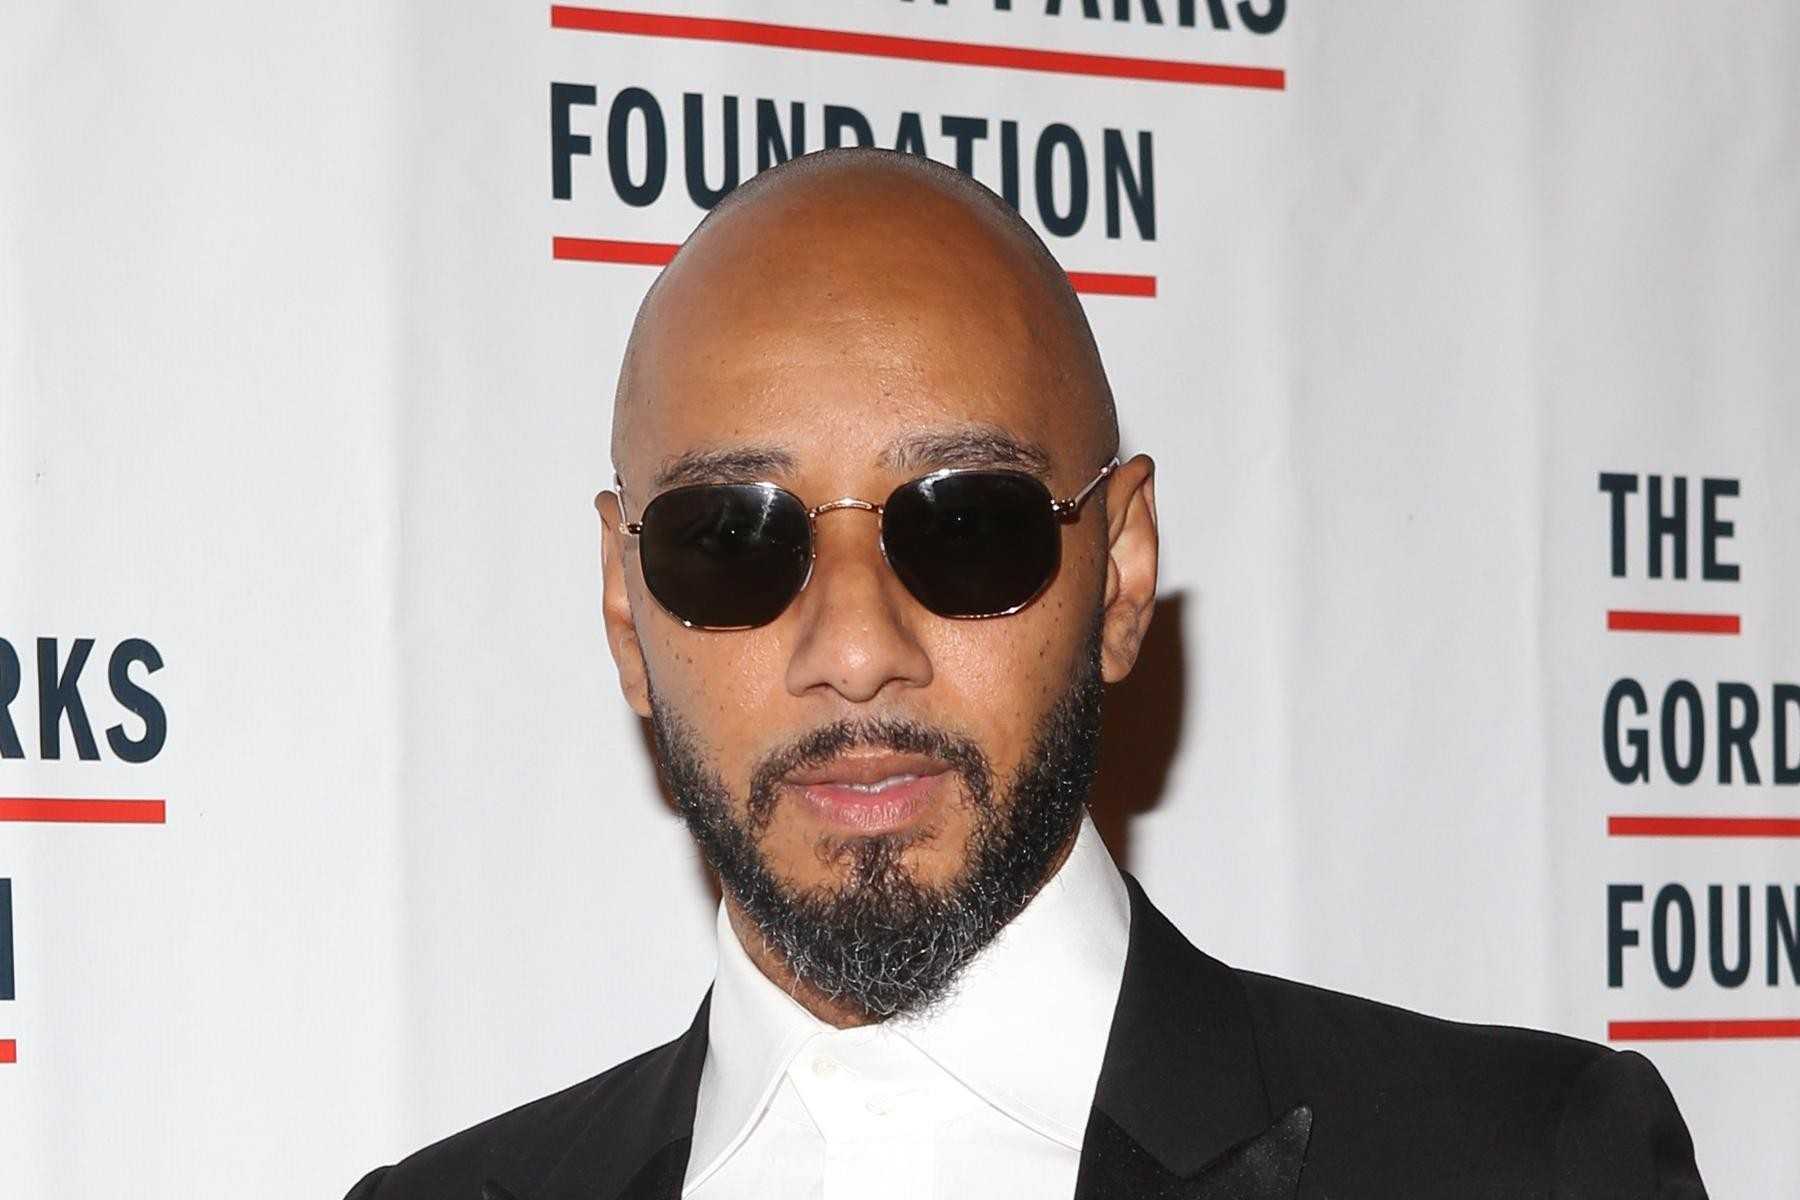 What Is Swizz Beatz Beef With Usher About?